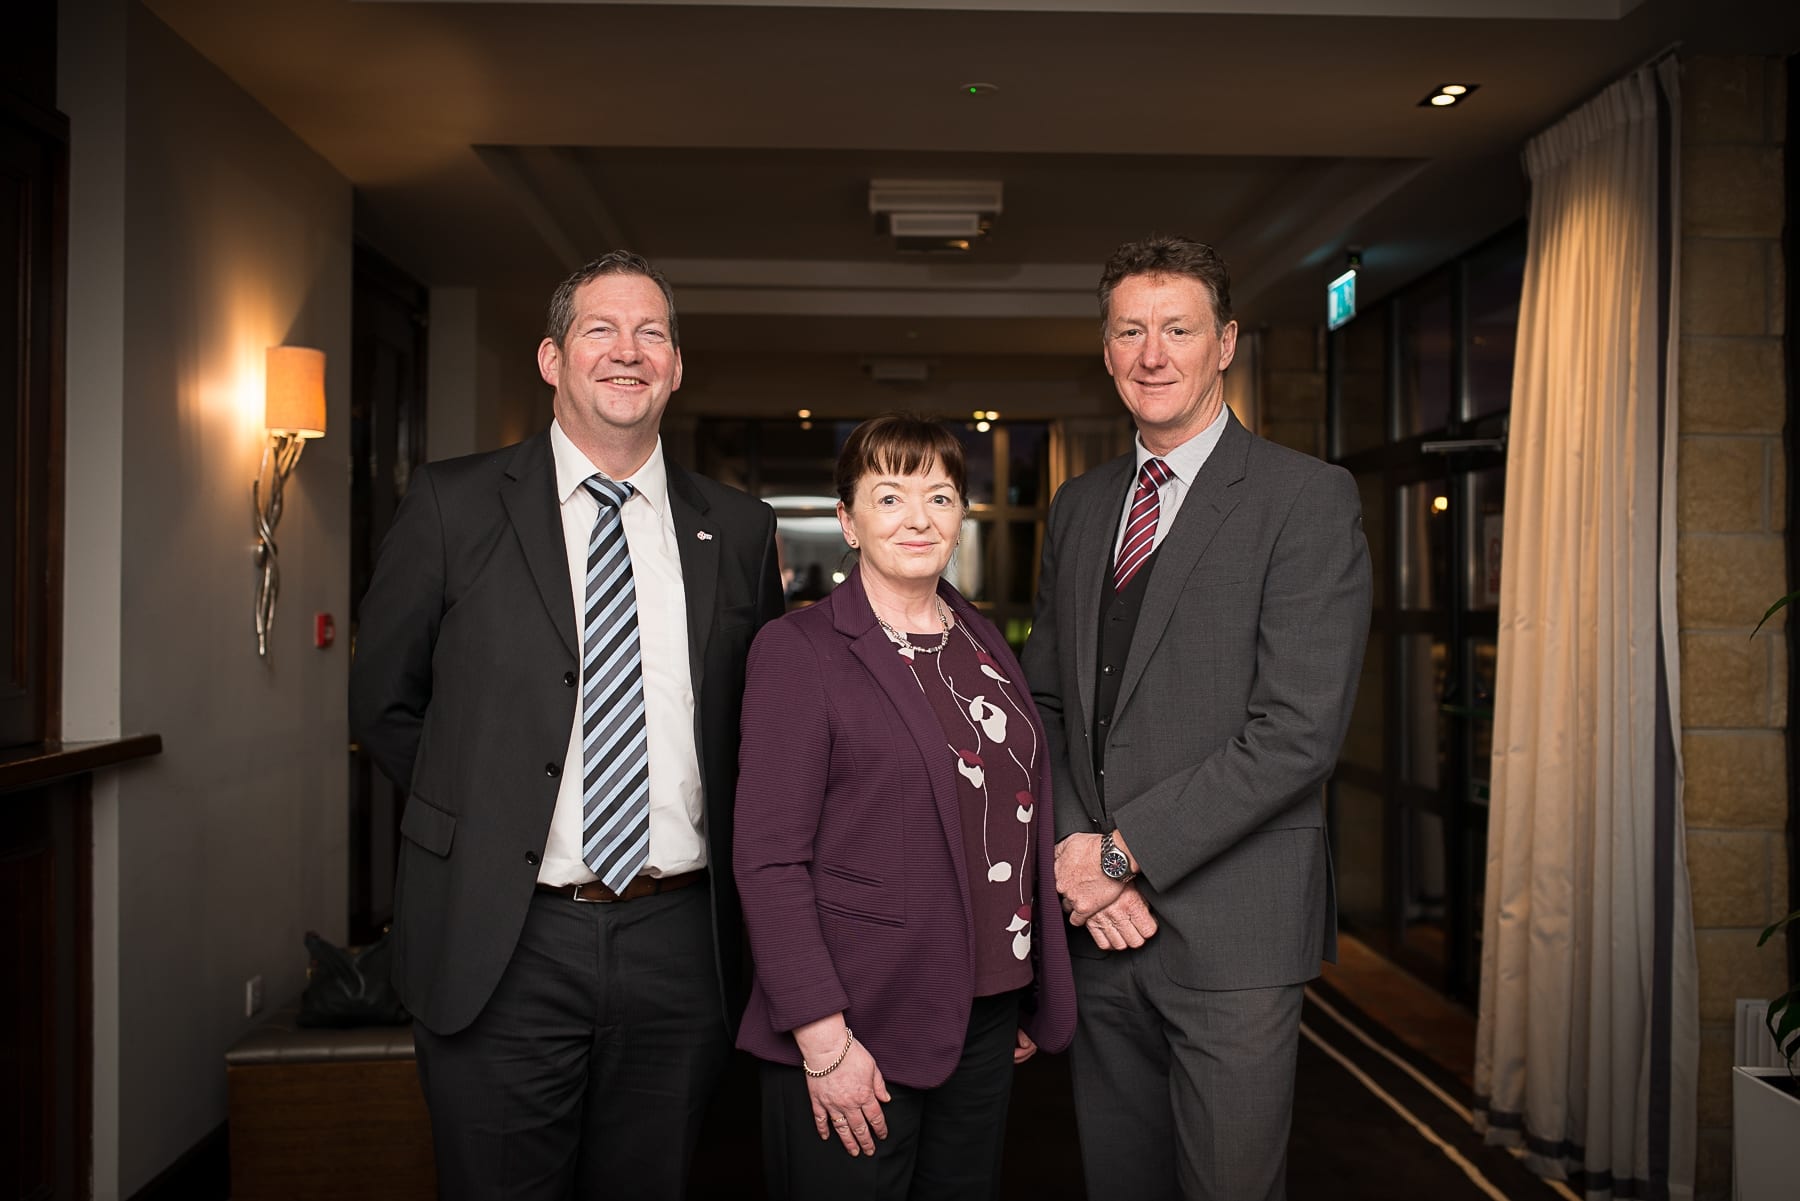 Economic Breakfast Briefing; European and Local Economic Outlook In association with the Limerick Post which took place in the Castletroy Park Hotel on Monday 11th Feb 2019:  From left to right:  Dr Liam Browne - Vice President LIT, Joan O’Dell - AIB, Tommy Lenahan  - AIB. 
 Image by Morning Star Photography